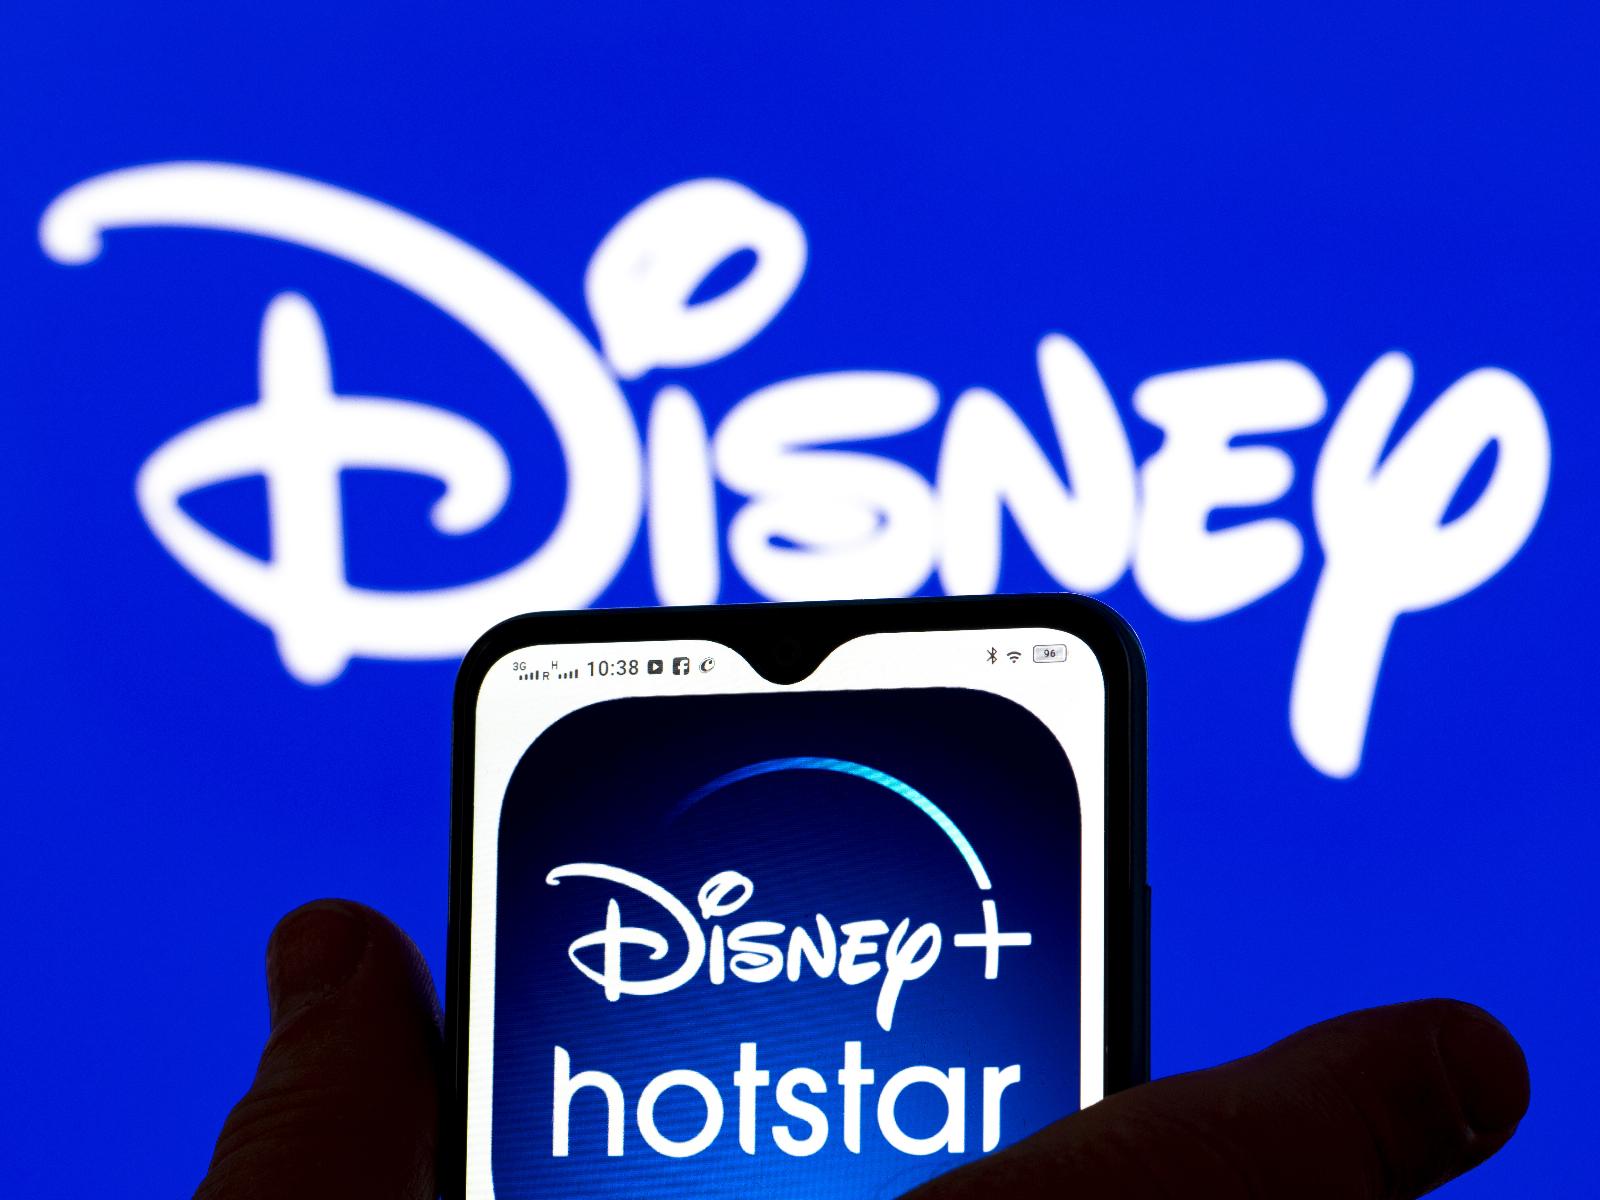 Disney’s Hotstar to offer free mobile cricket streaming in India to take on Reliance’s JioCinema